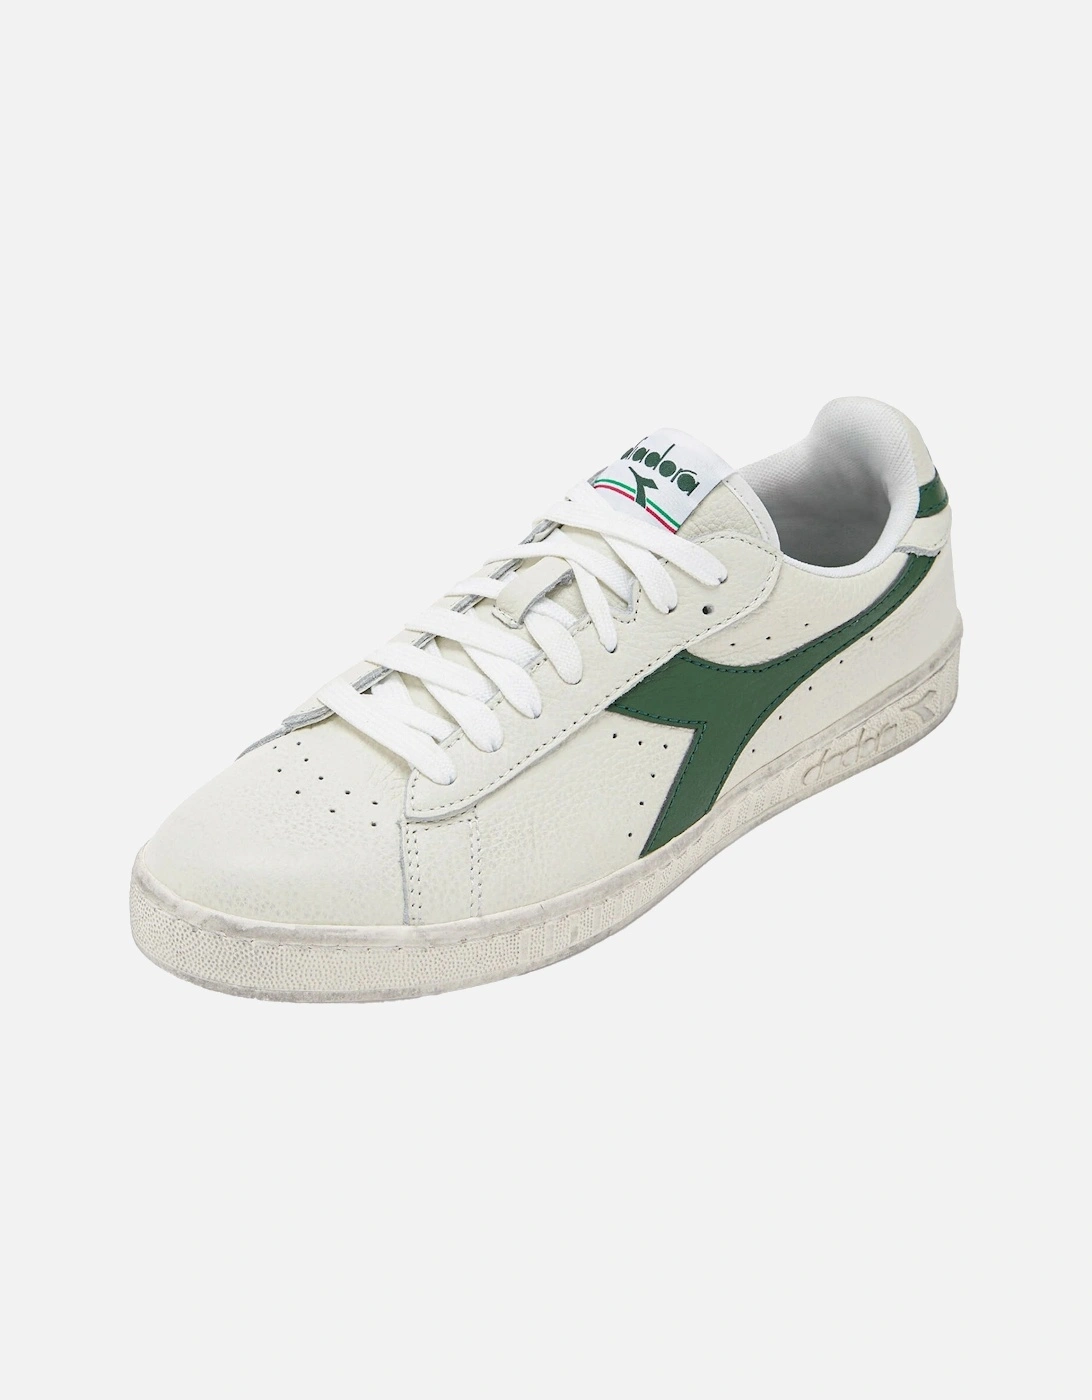 Mens Game Low Waxed Trainers (White/Green)